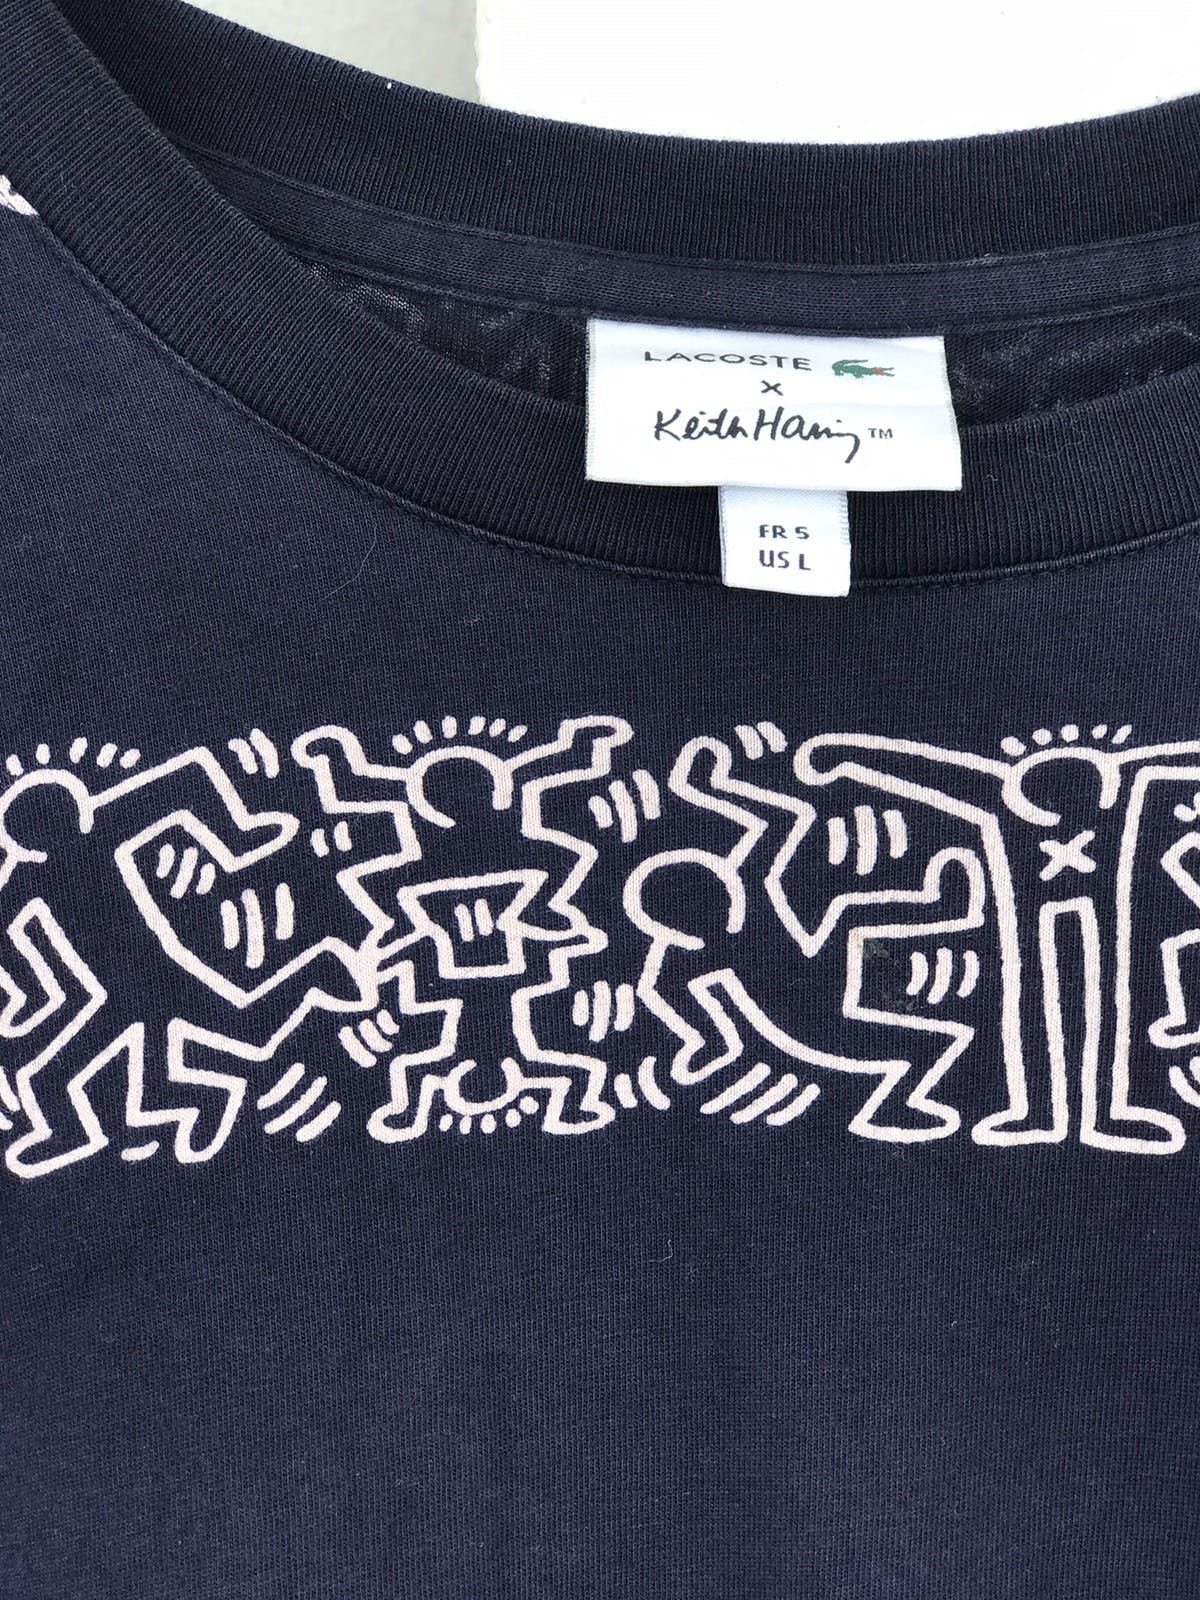 Lacoste collaboration with keith haring Tee - 4